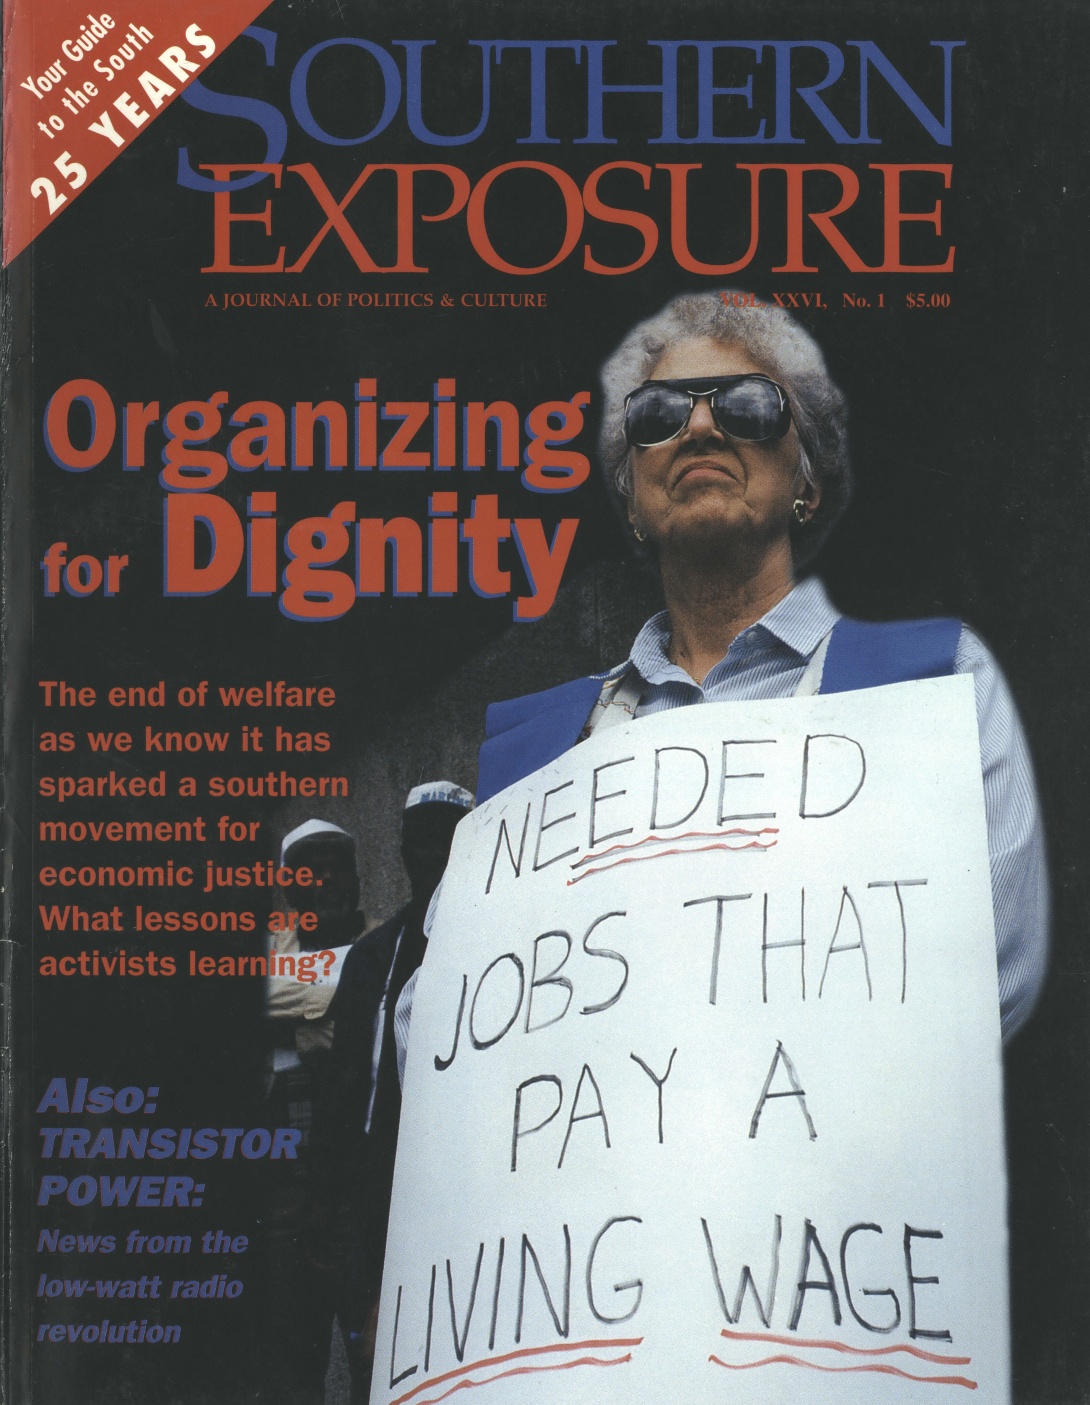 Southern Exposure cover that reads "Organizing for Dignity" and features an older woman in sunglasses holding a sign